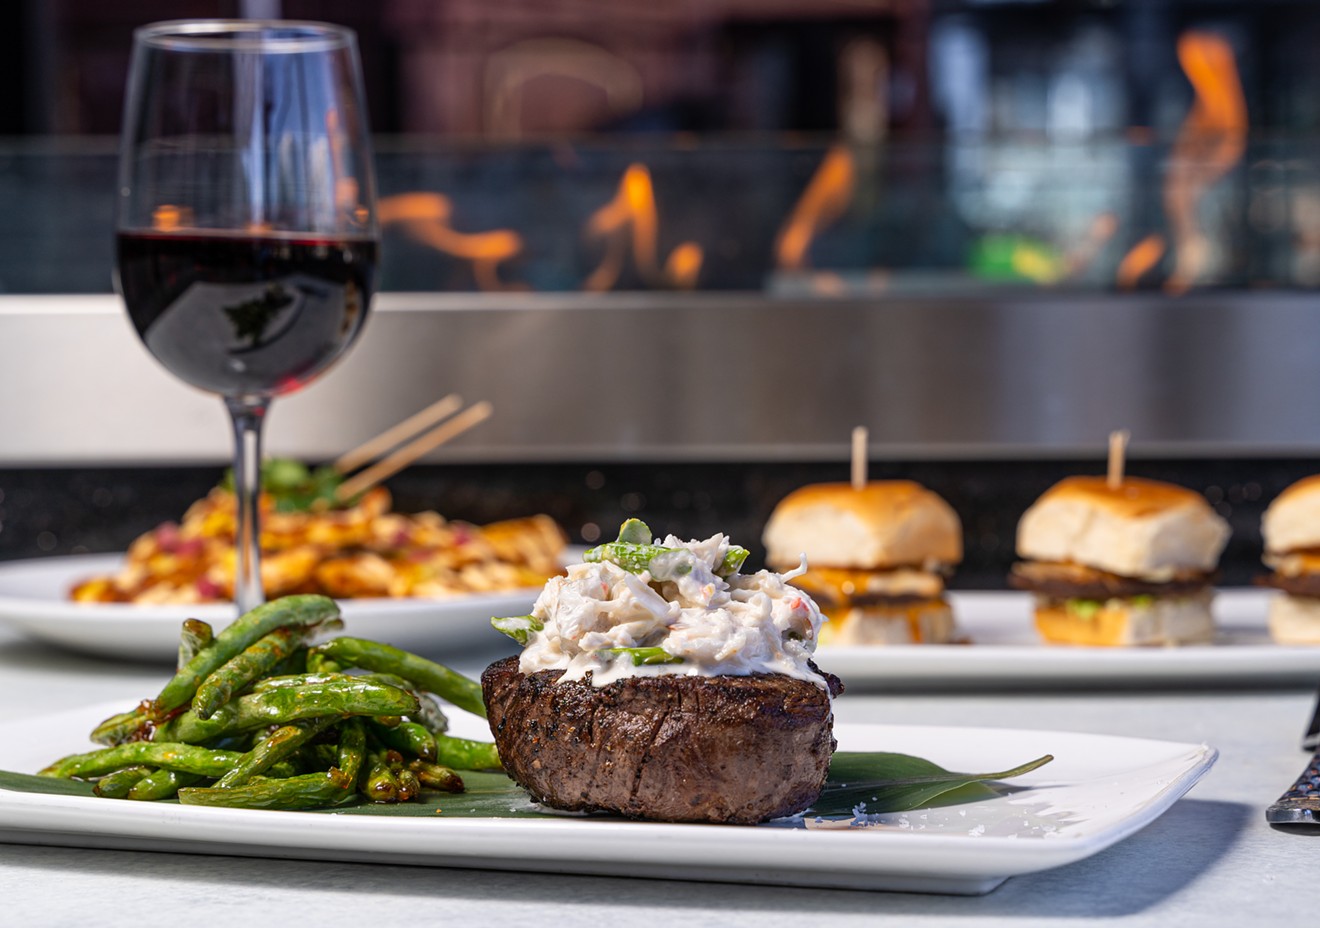 Celebrate the holidays at Valley restaurants including Kona Grill which has takeout and dine-in options for Christmas Eve and Day.